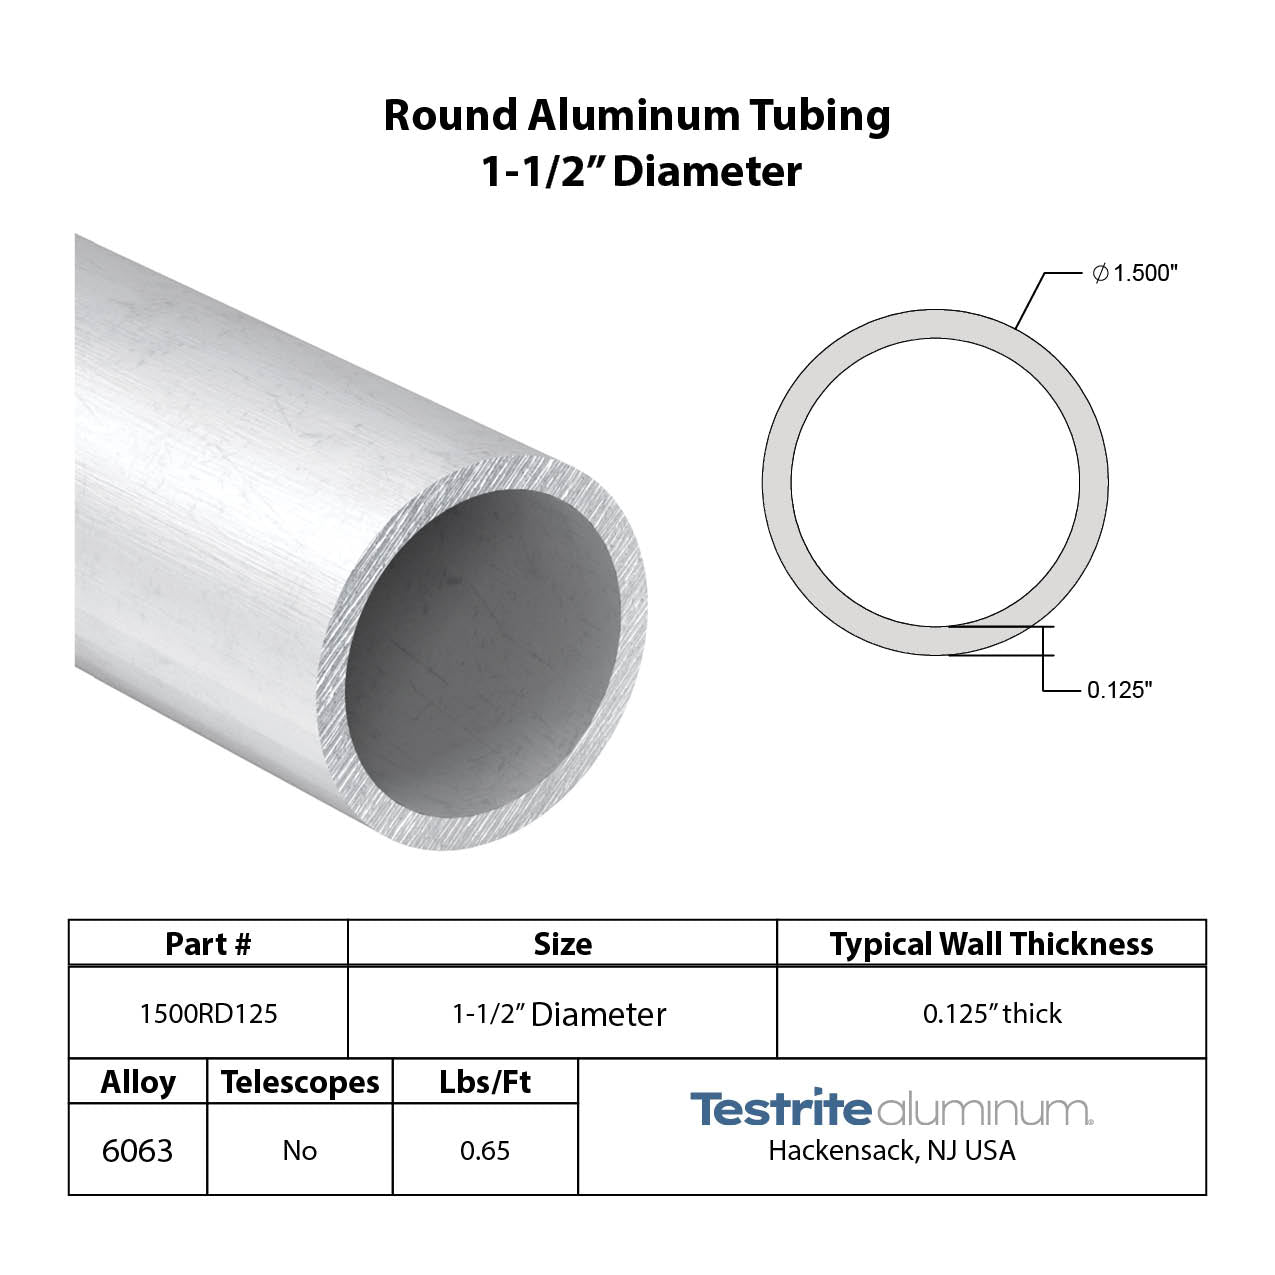 Round aluminum tubing 1-1/2" Diameter x 1/8" Wall, this 1.5" x .125" aluminum tube round hollow can be cut to size, spec card shows lbs/ft